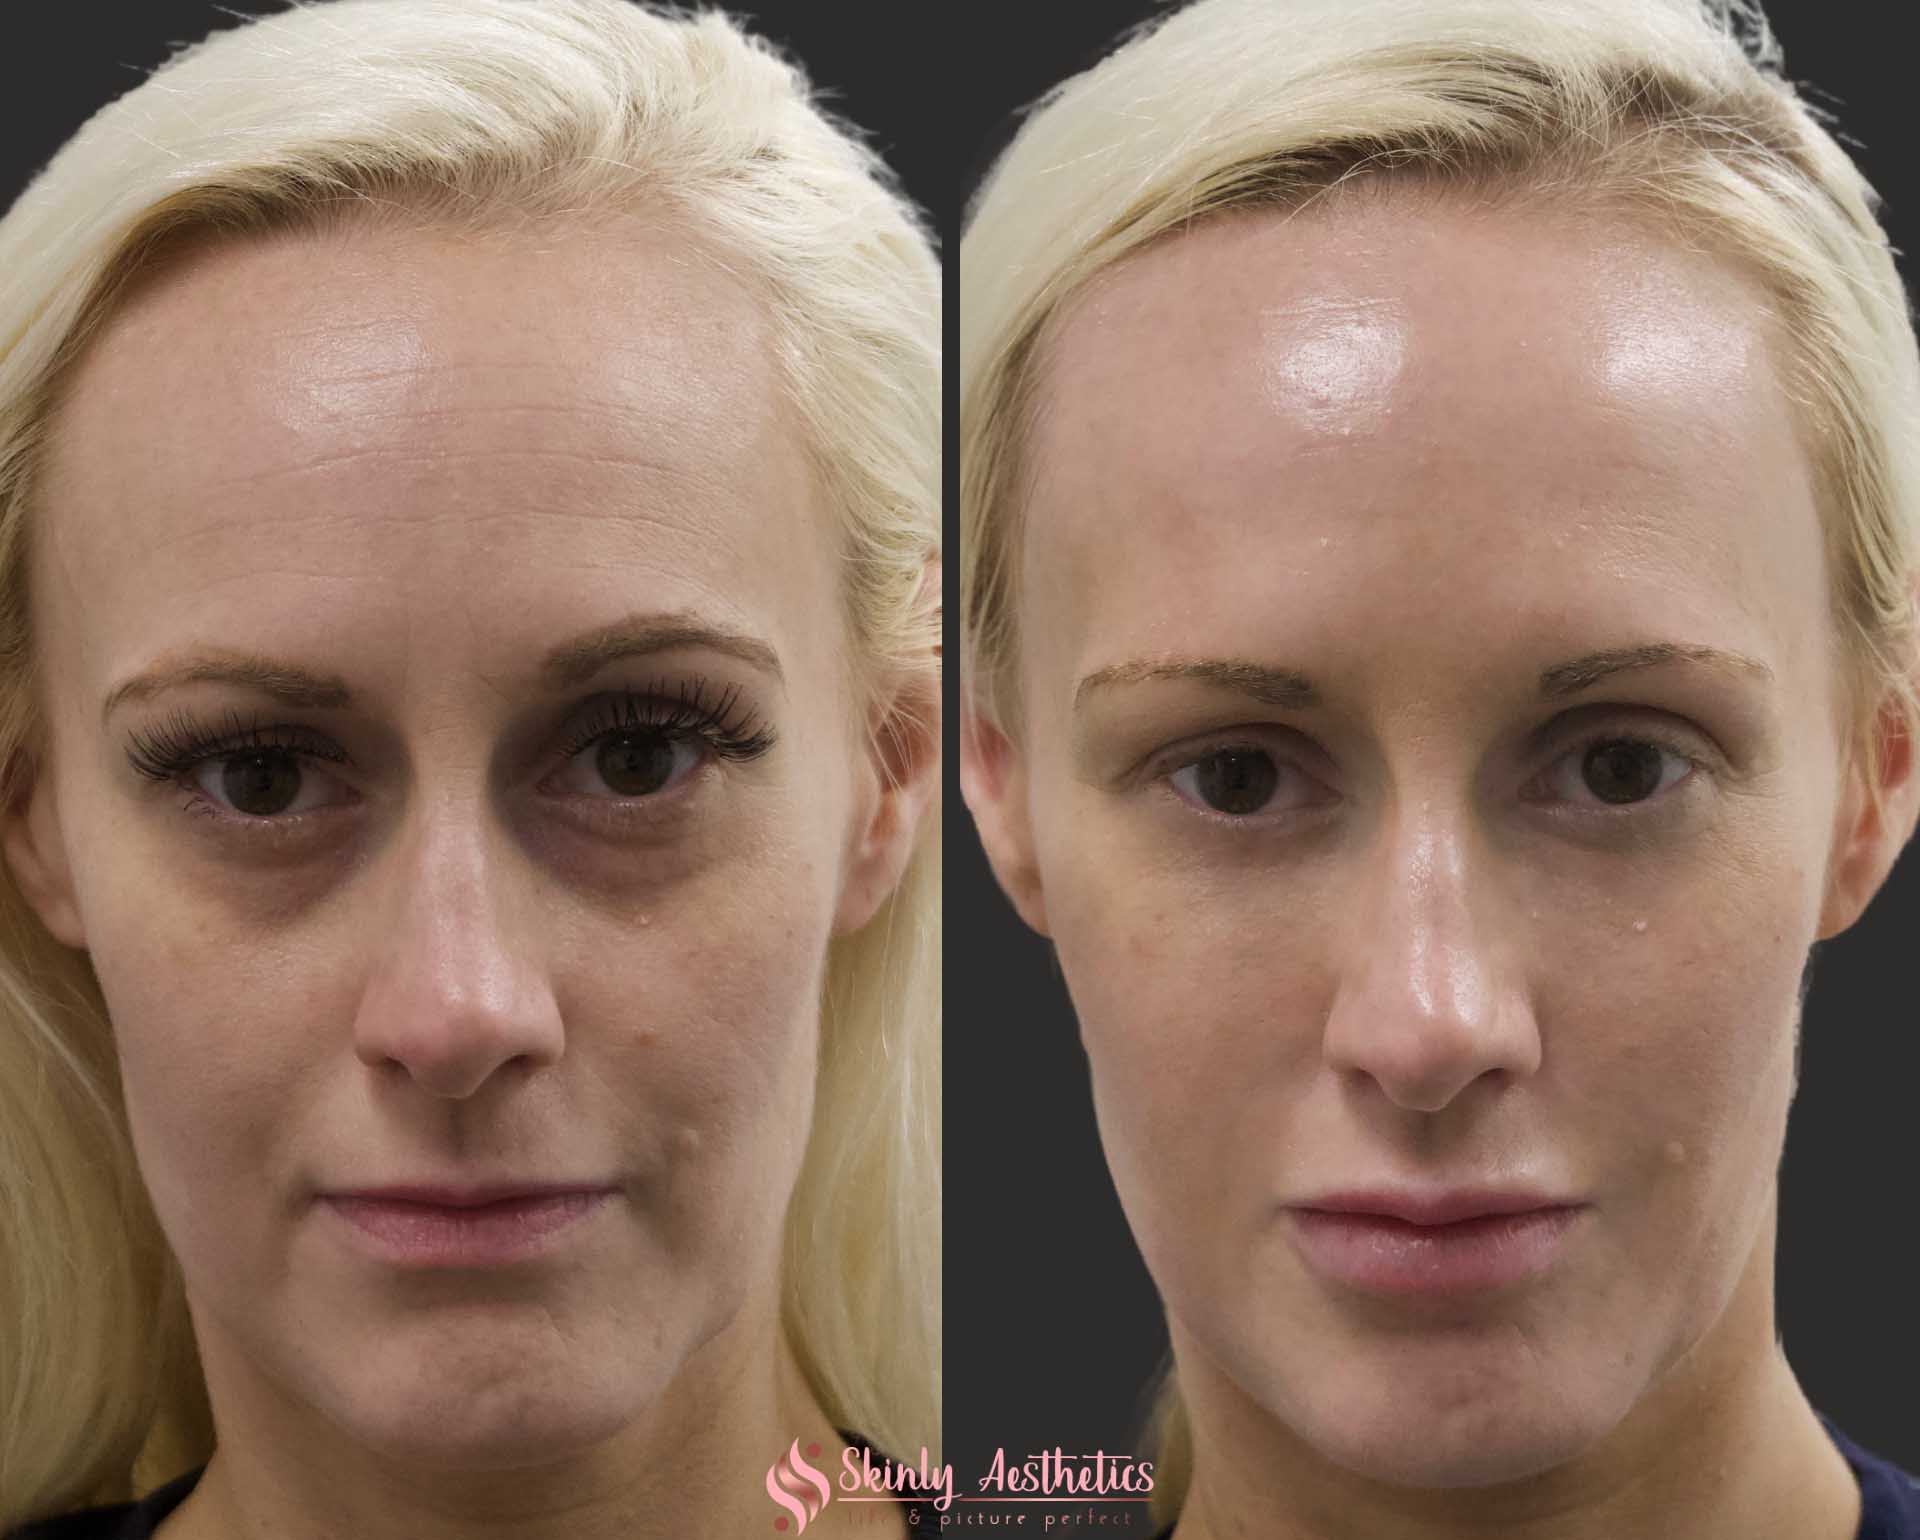 before and after results following under eye dark circles treatment with Juvederm filler